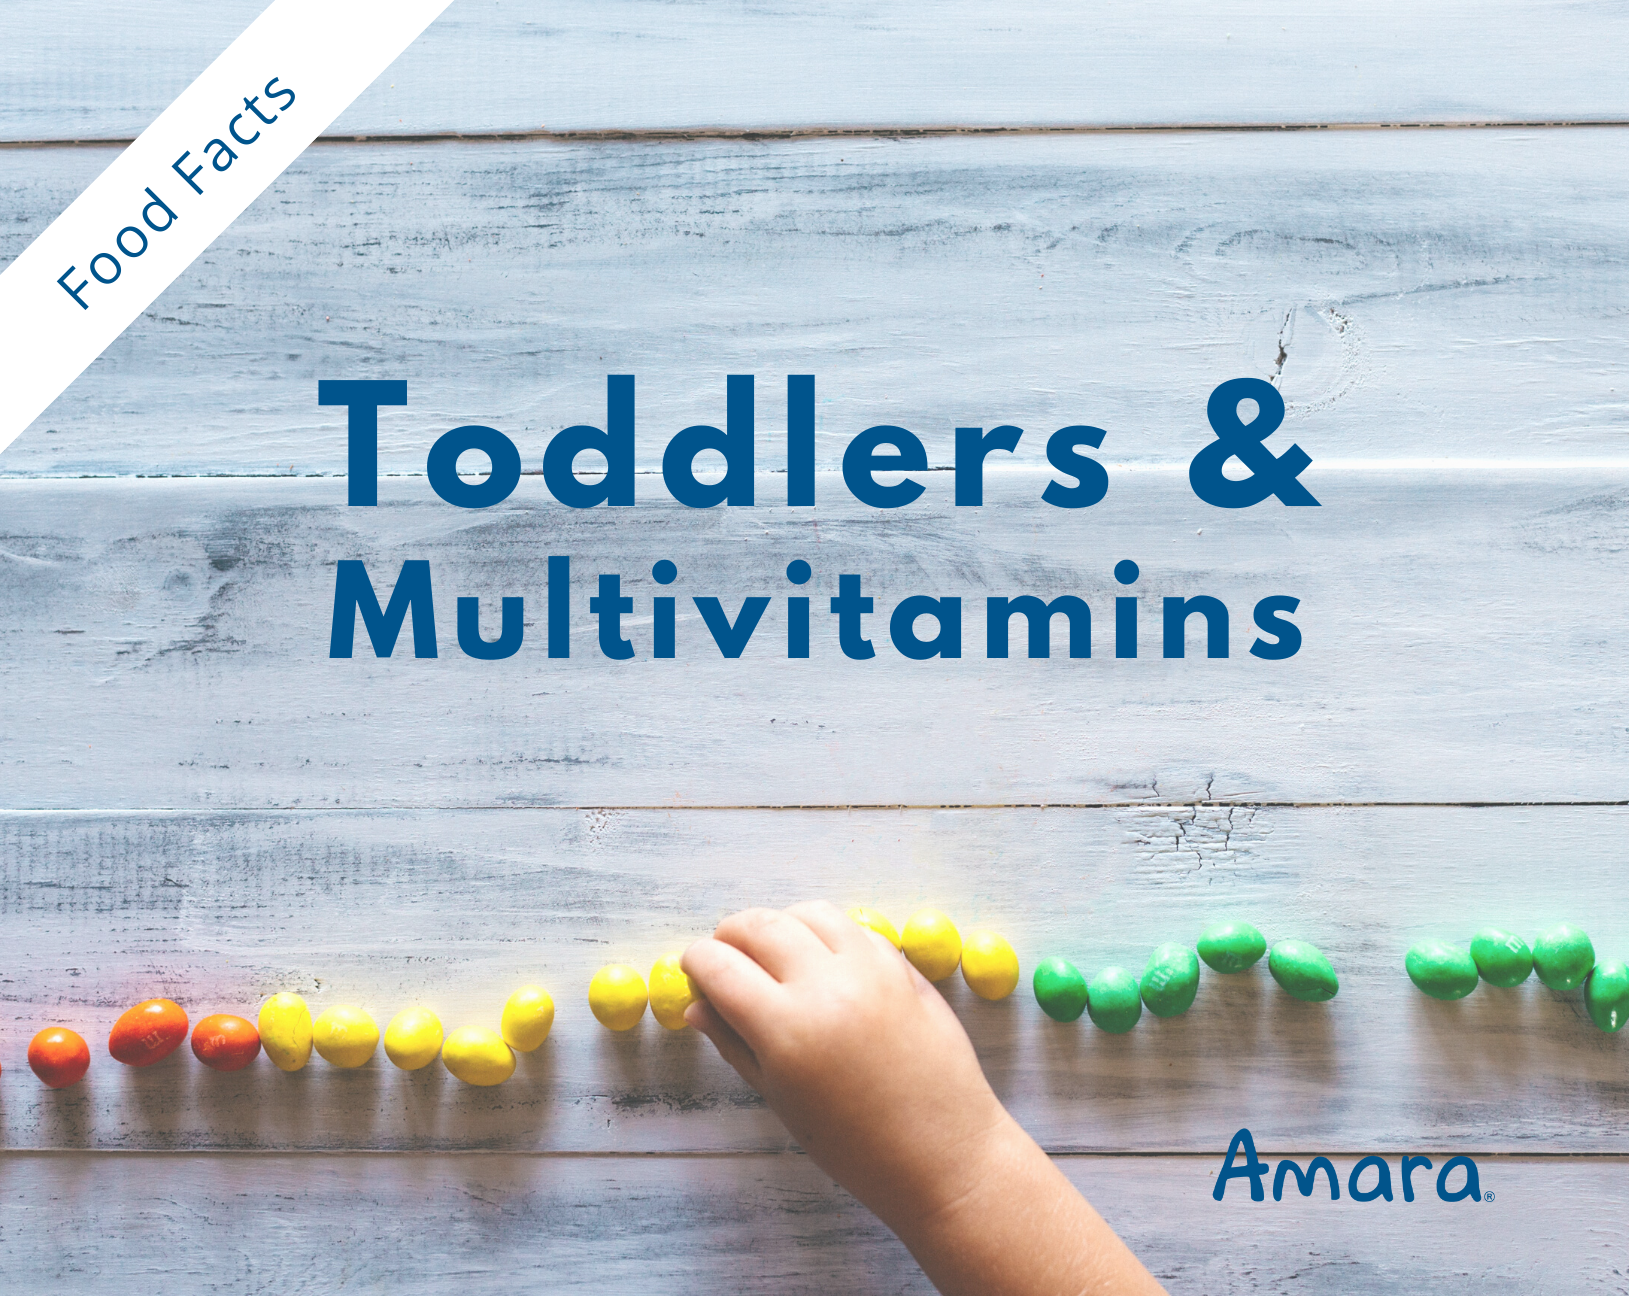 do toddlers need a multivitamin